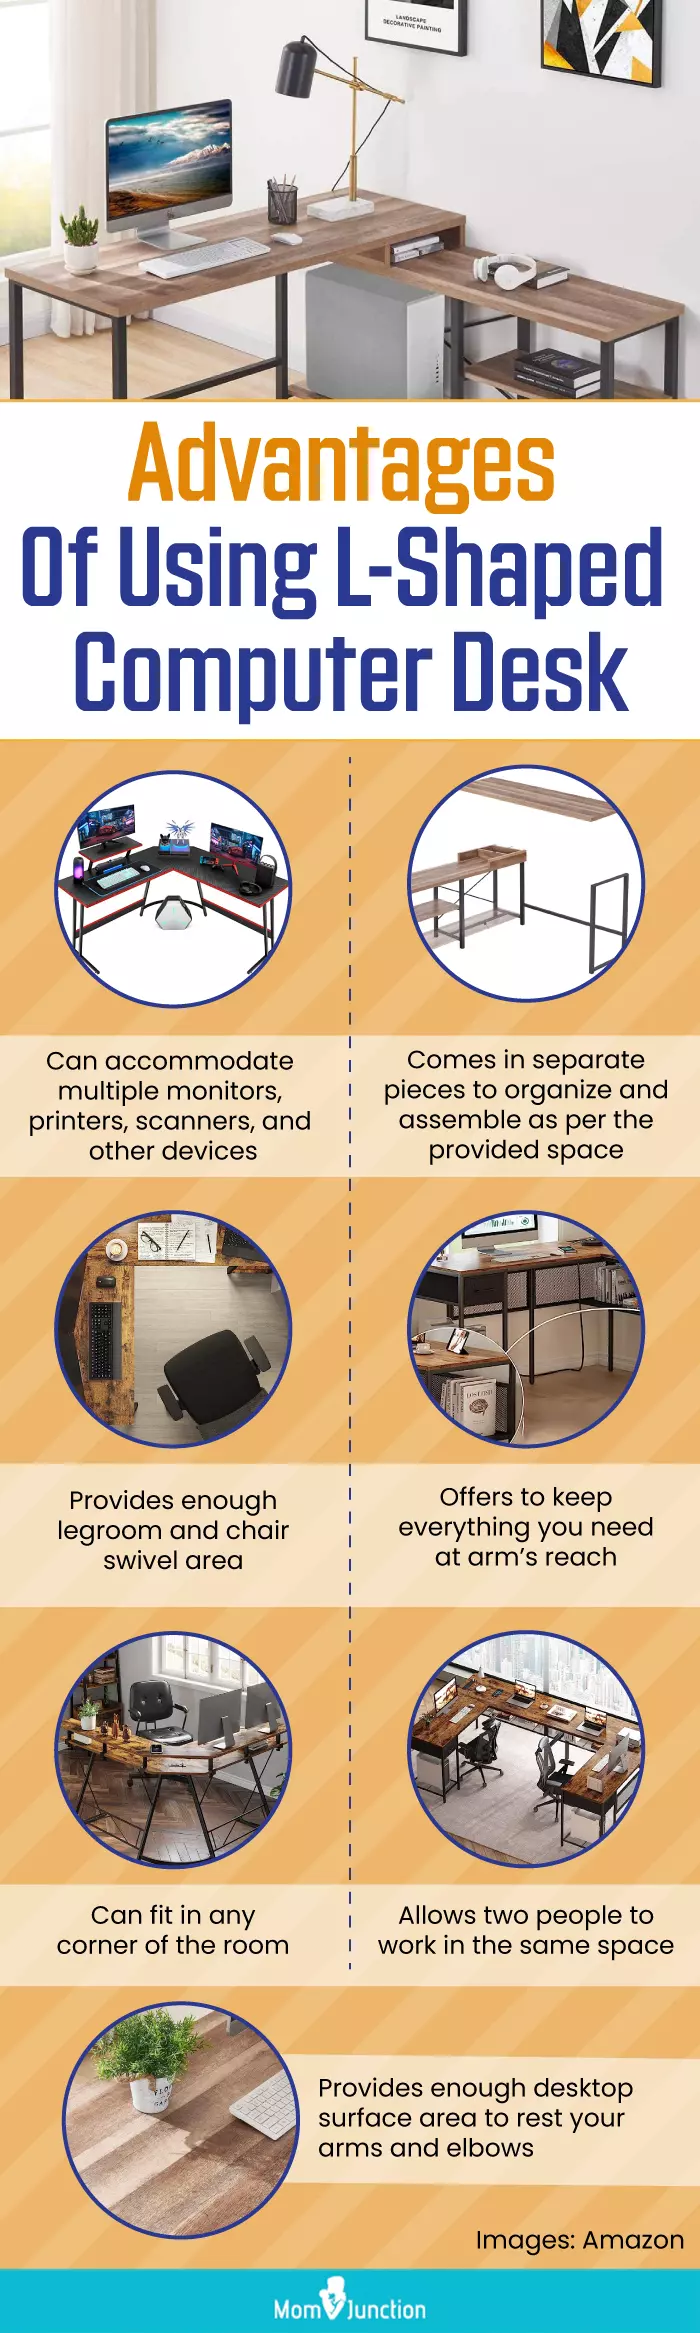 Advantages Of Using L Shaped Computer Desk (infographic)